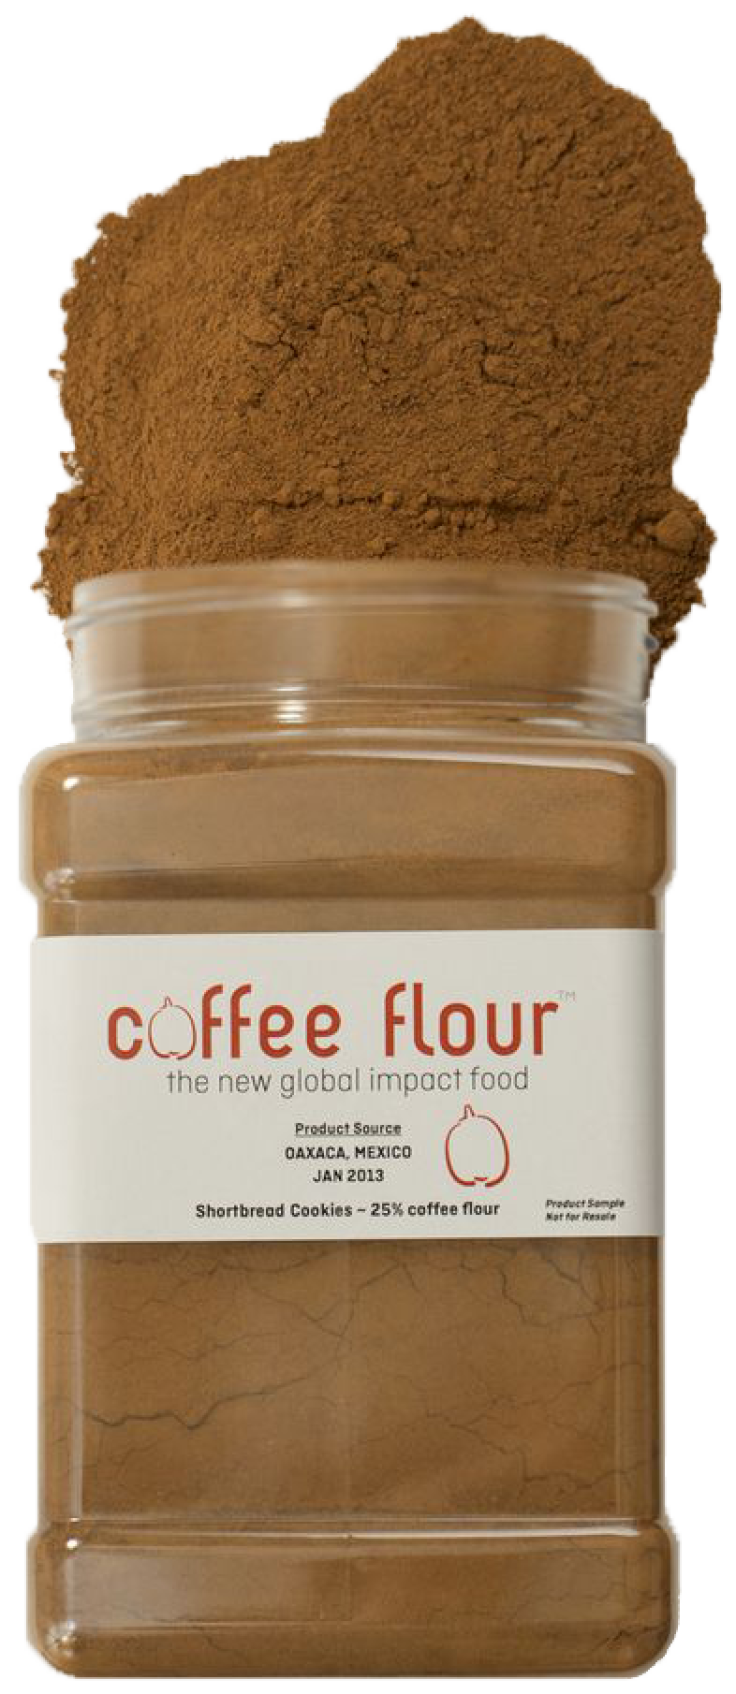 Coffee Flour is a baking ingredient that contains coffee cherries